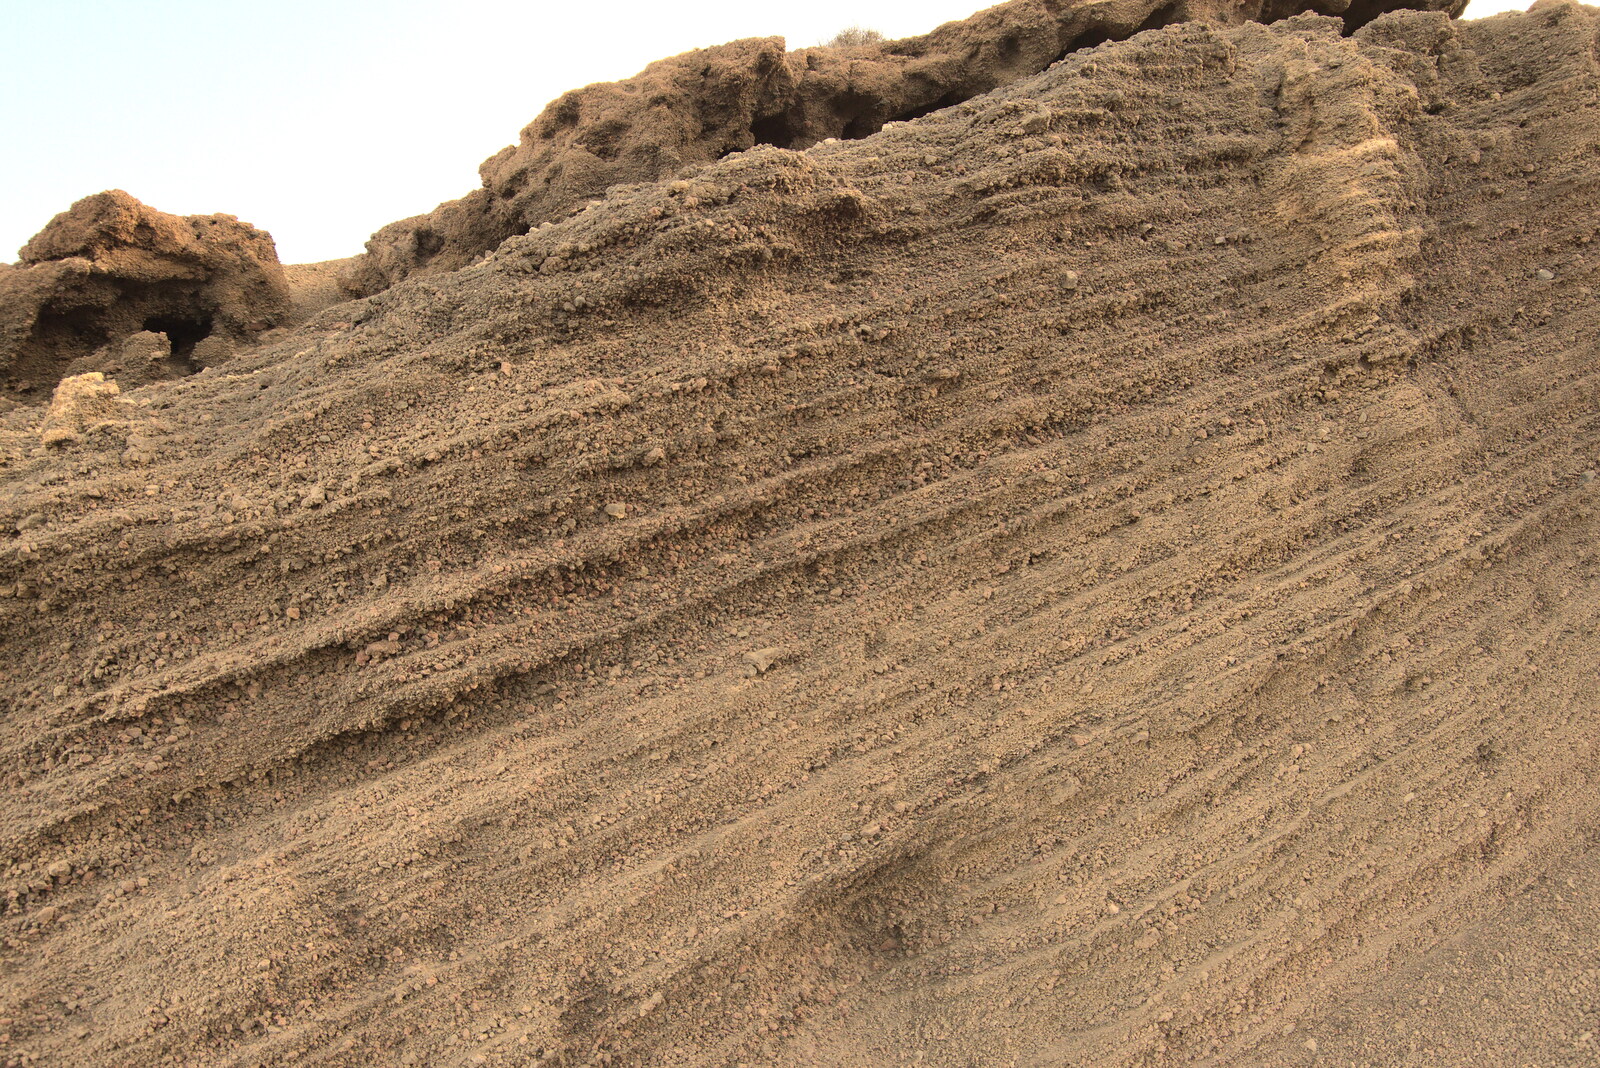 Layers and layers of ash deposition from The Volcanoes of Lanzarote, Canary Islands, Spain - 27th October 2021